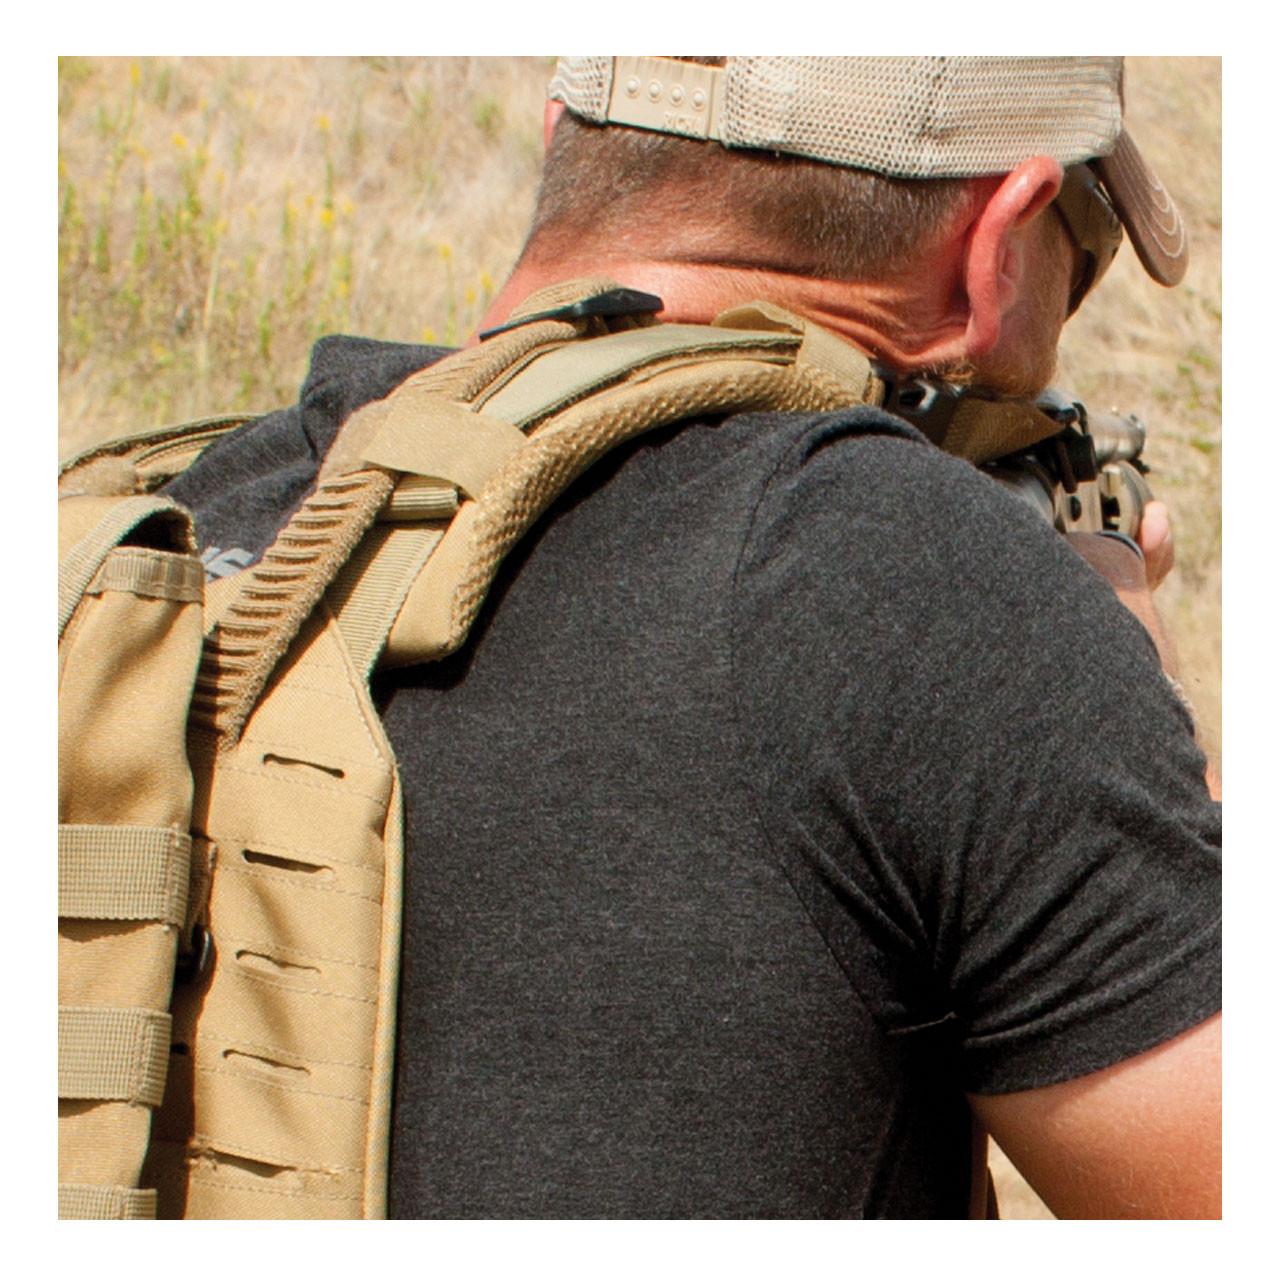 Tactical MOLLE Attachment For Swords